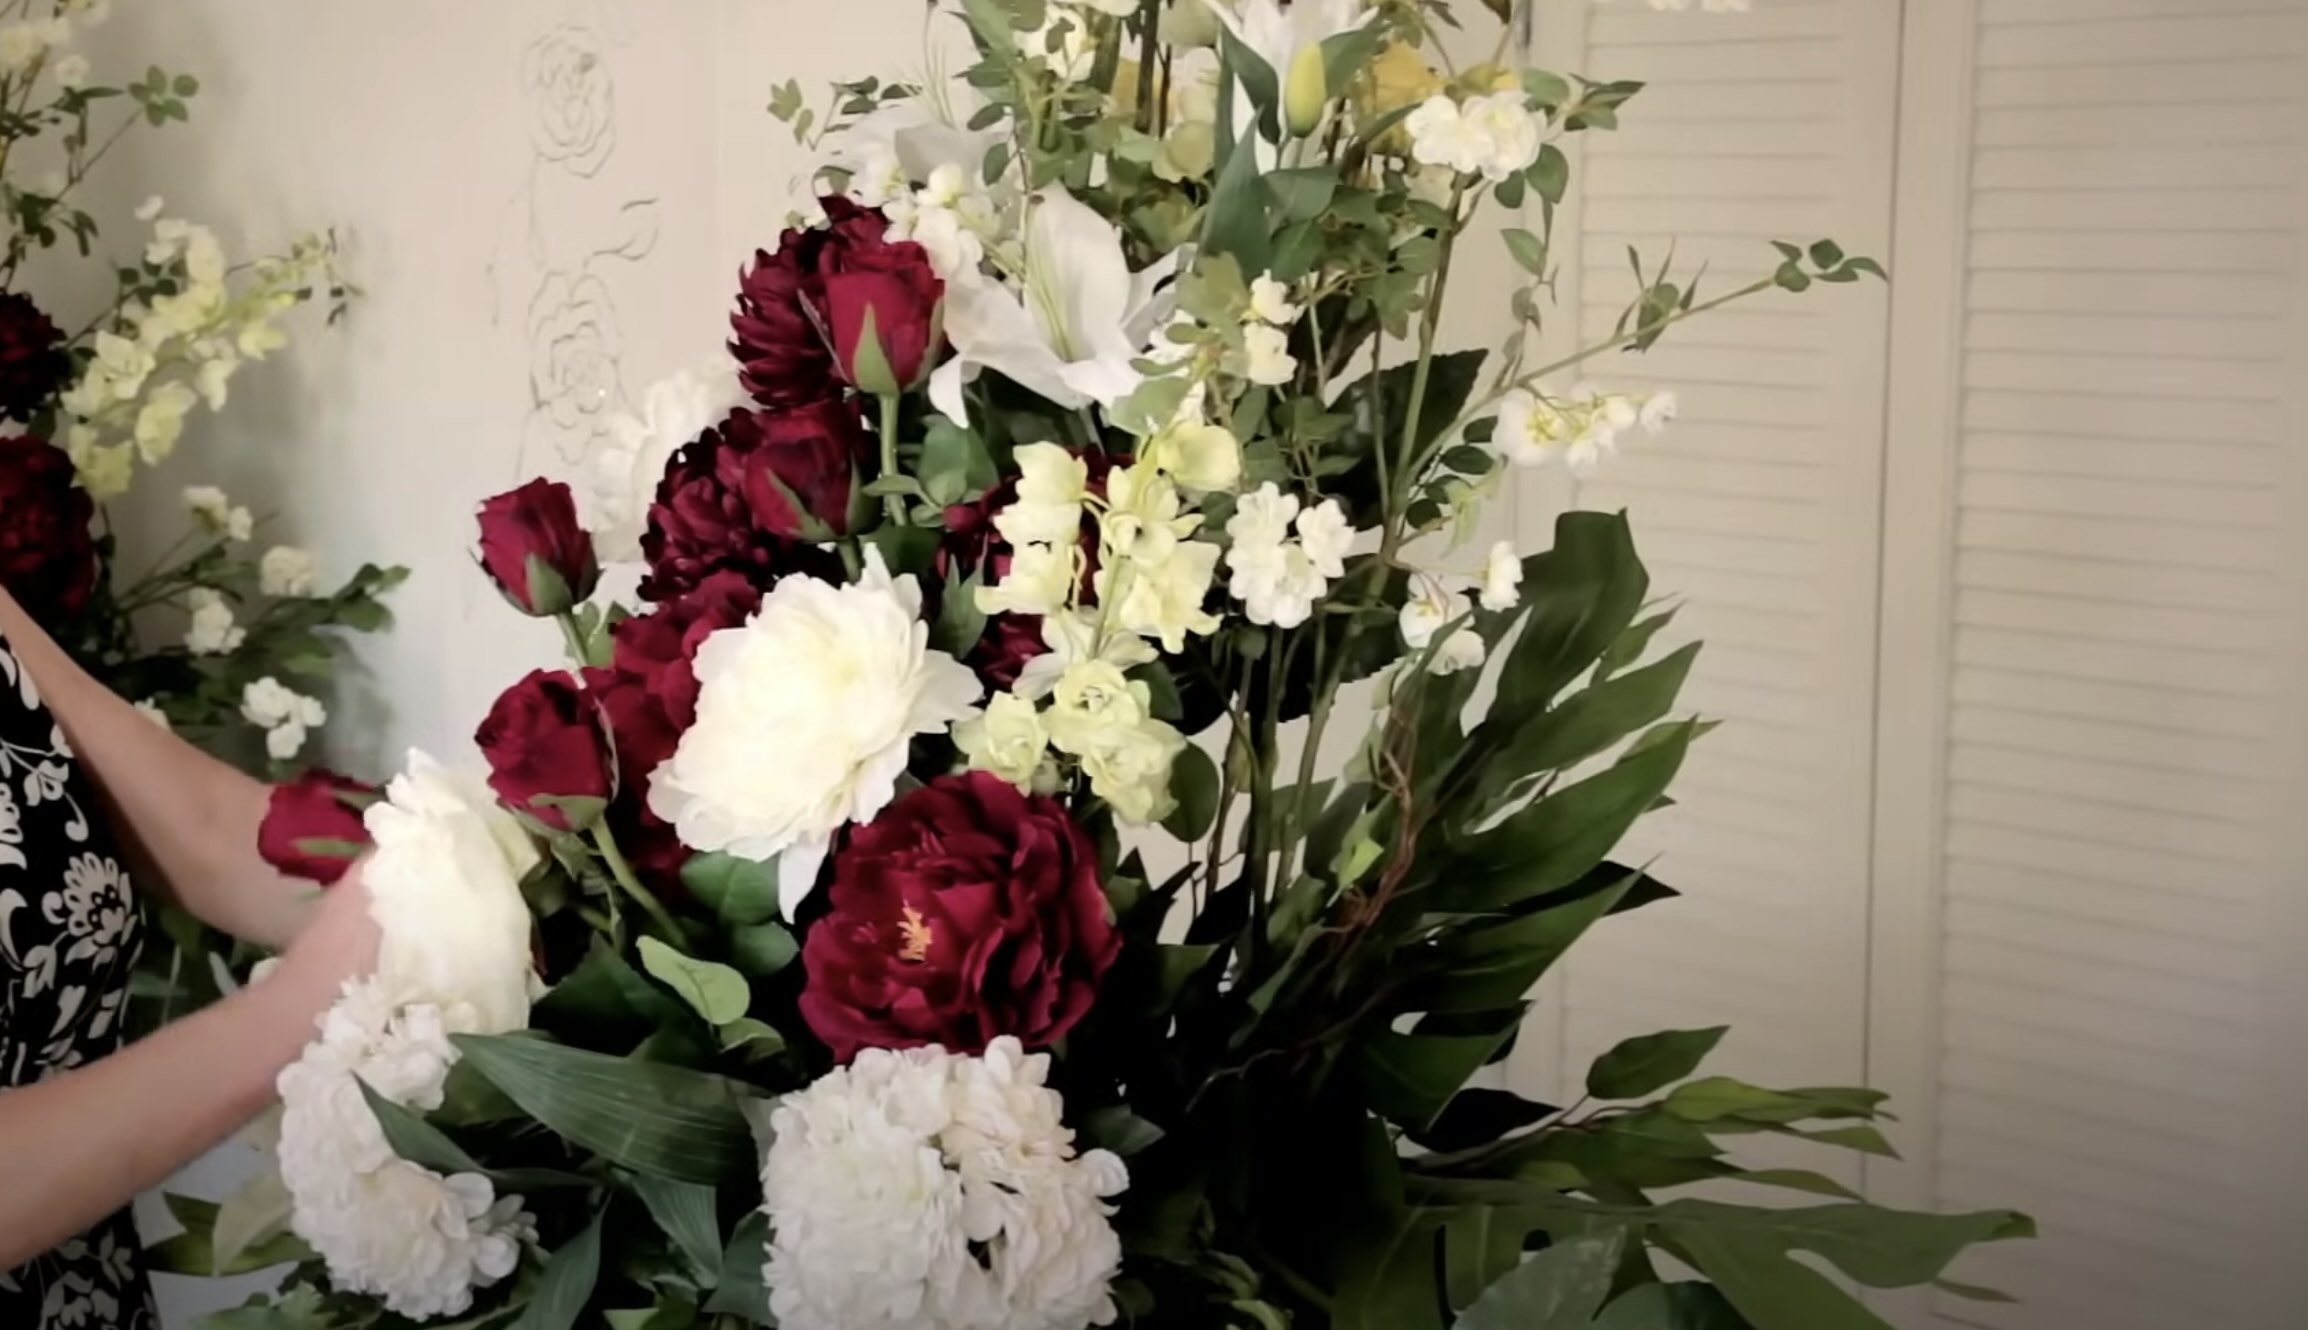 How To Make Church Floral Arrangements